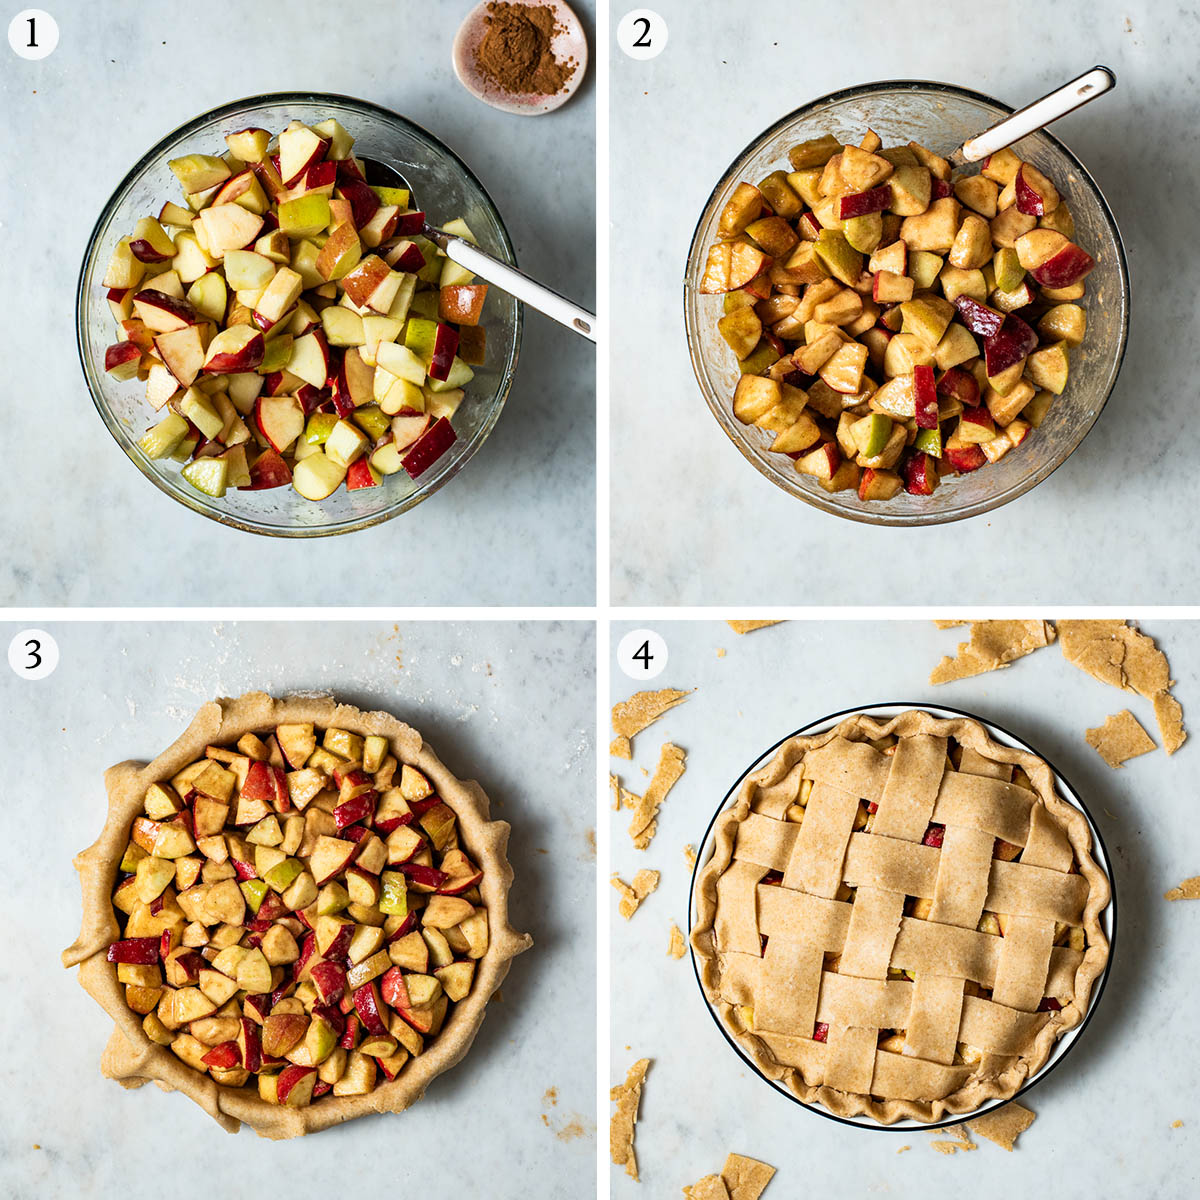 Apple pie steps 1 to 4, making the filling, adding to pie shell, and covered with lattice.